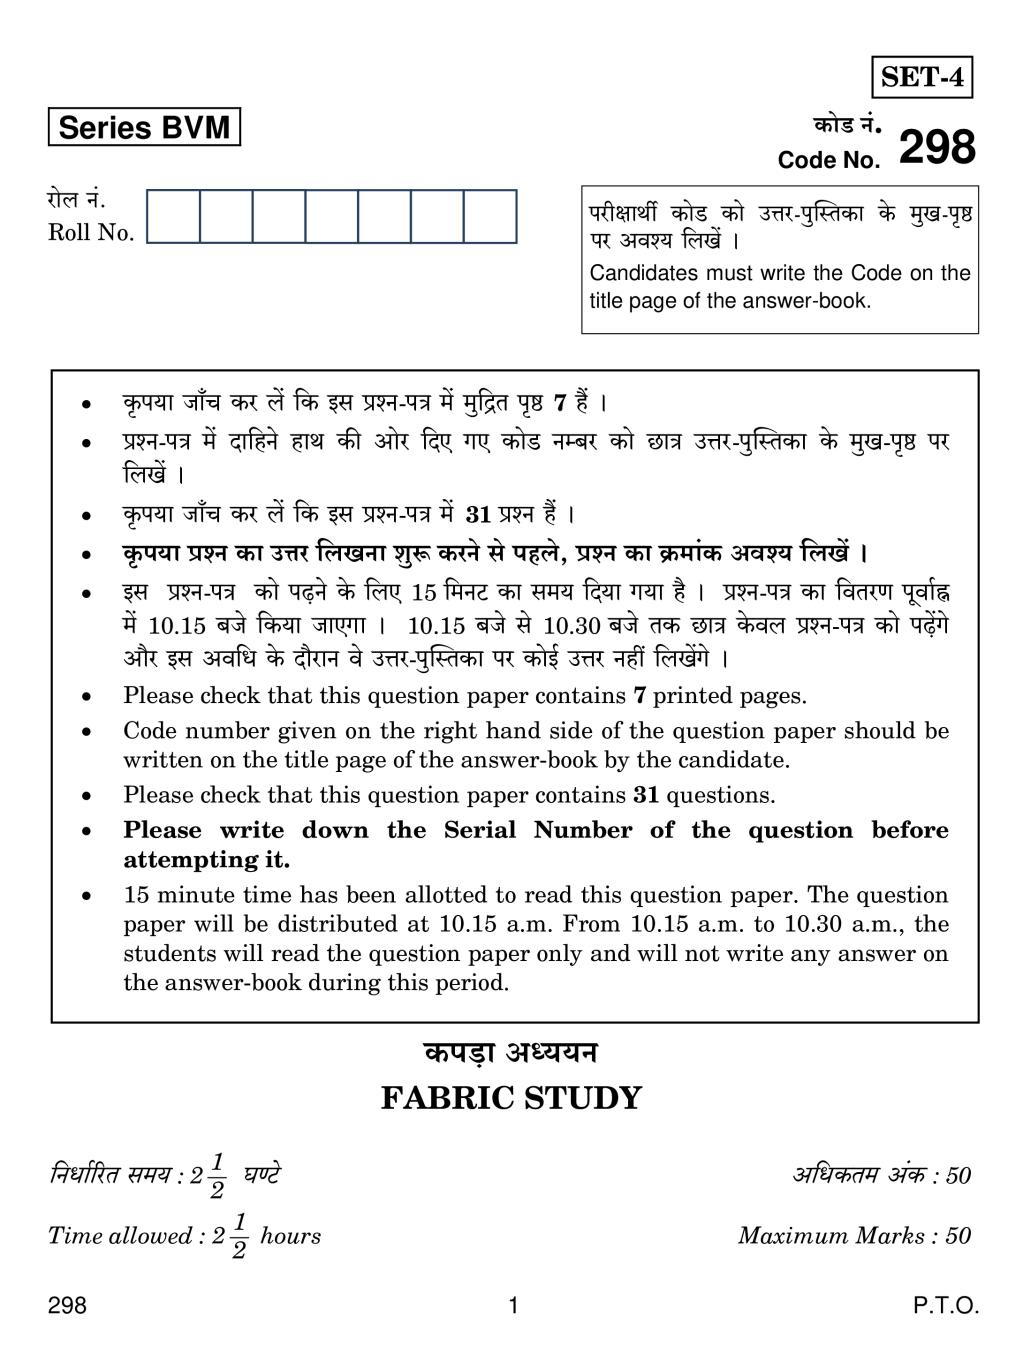 CBSE Class 12 Fabric Studies Question Paper 2019 - Page 1